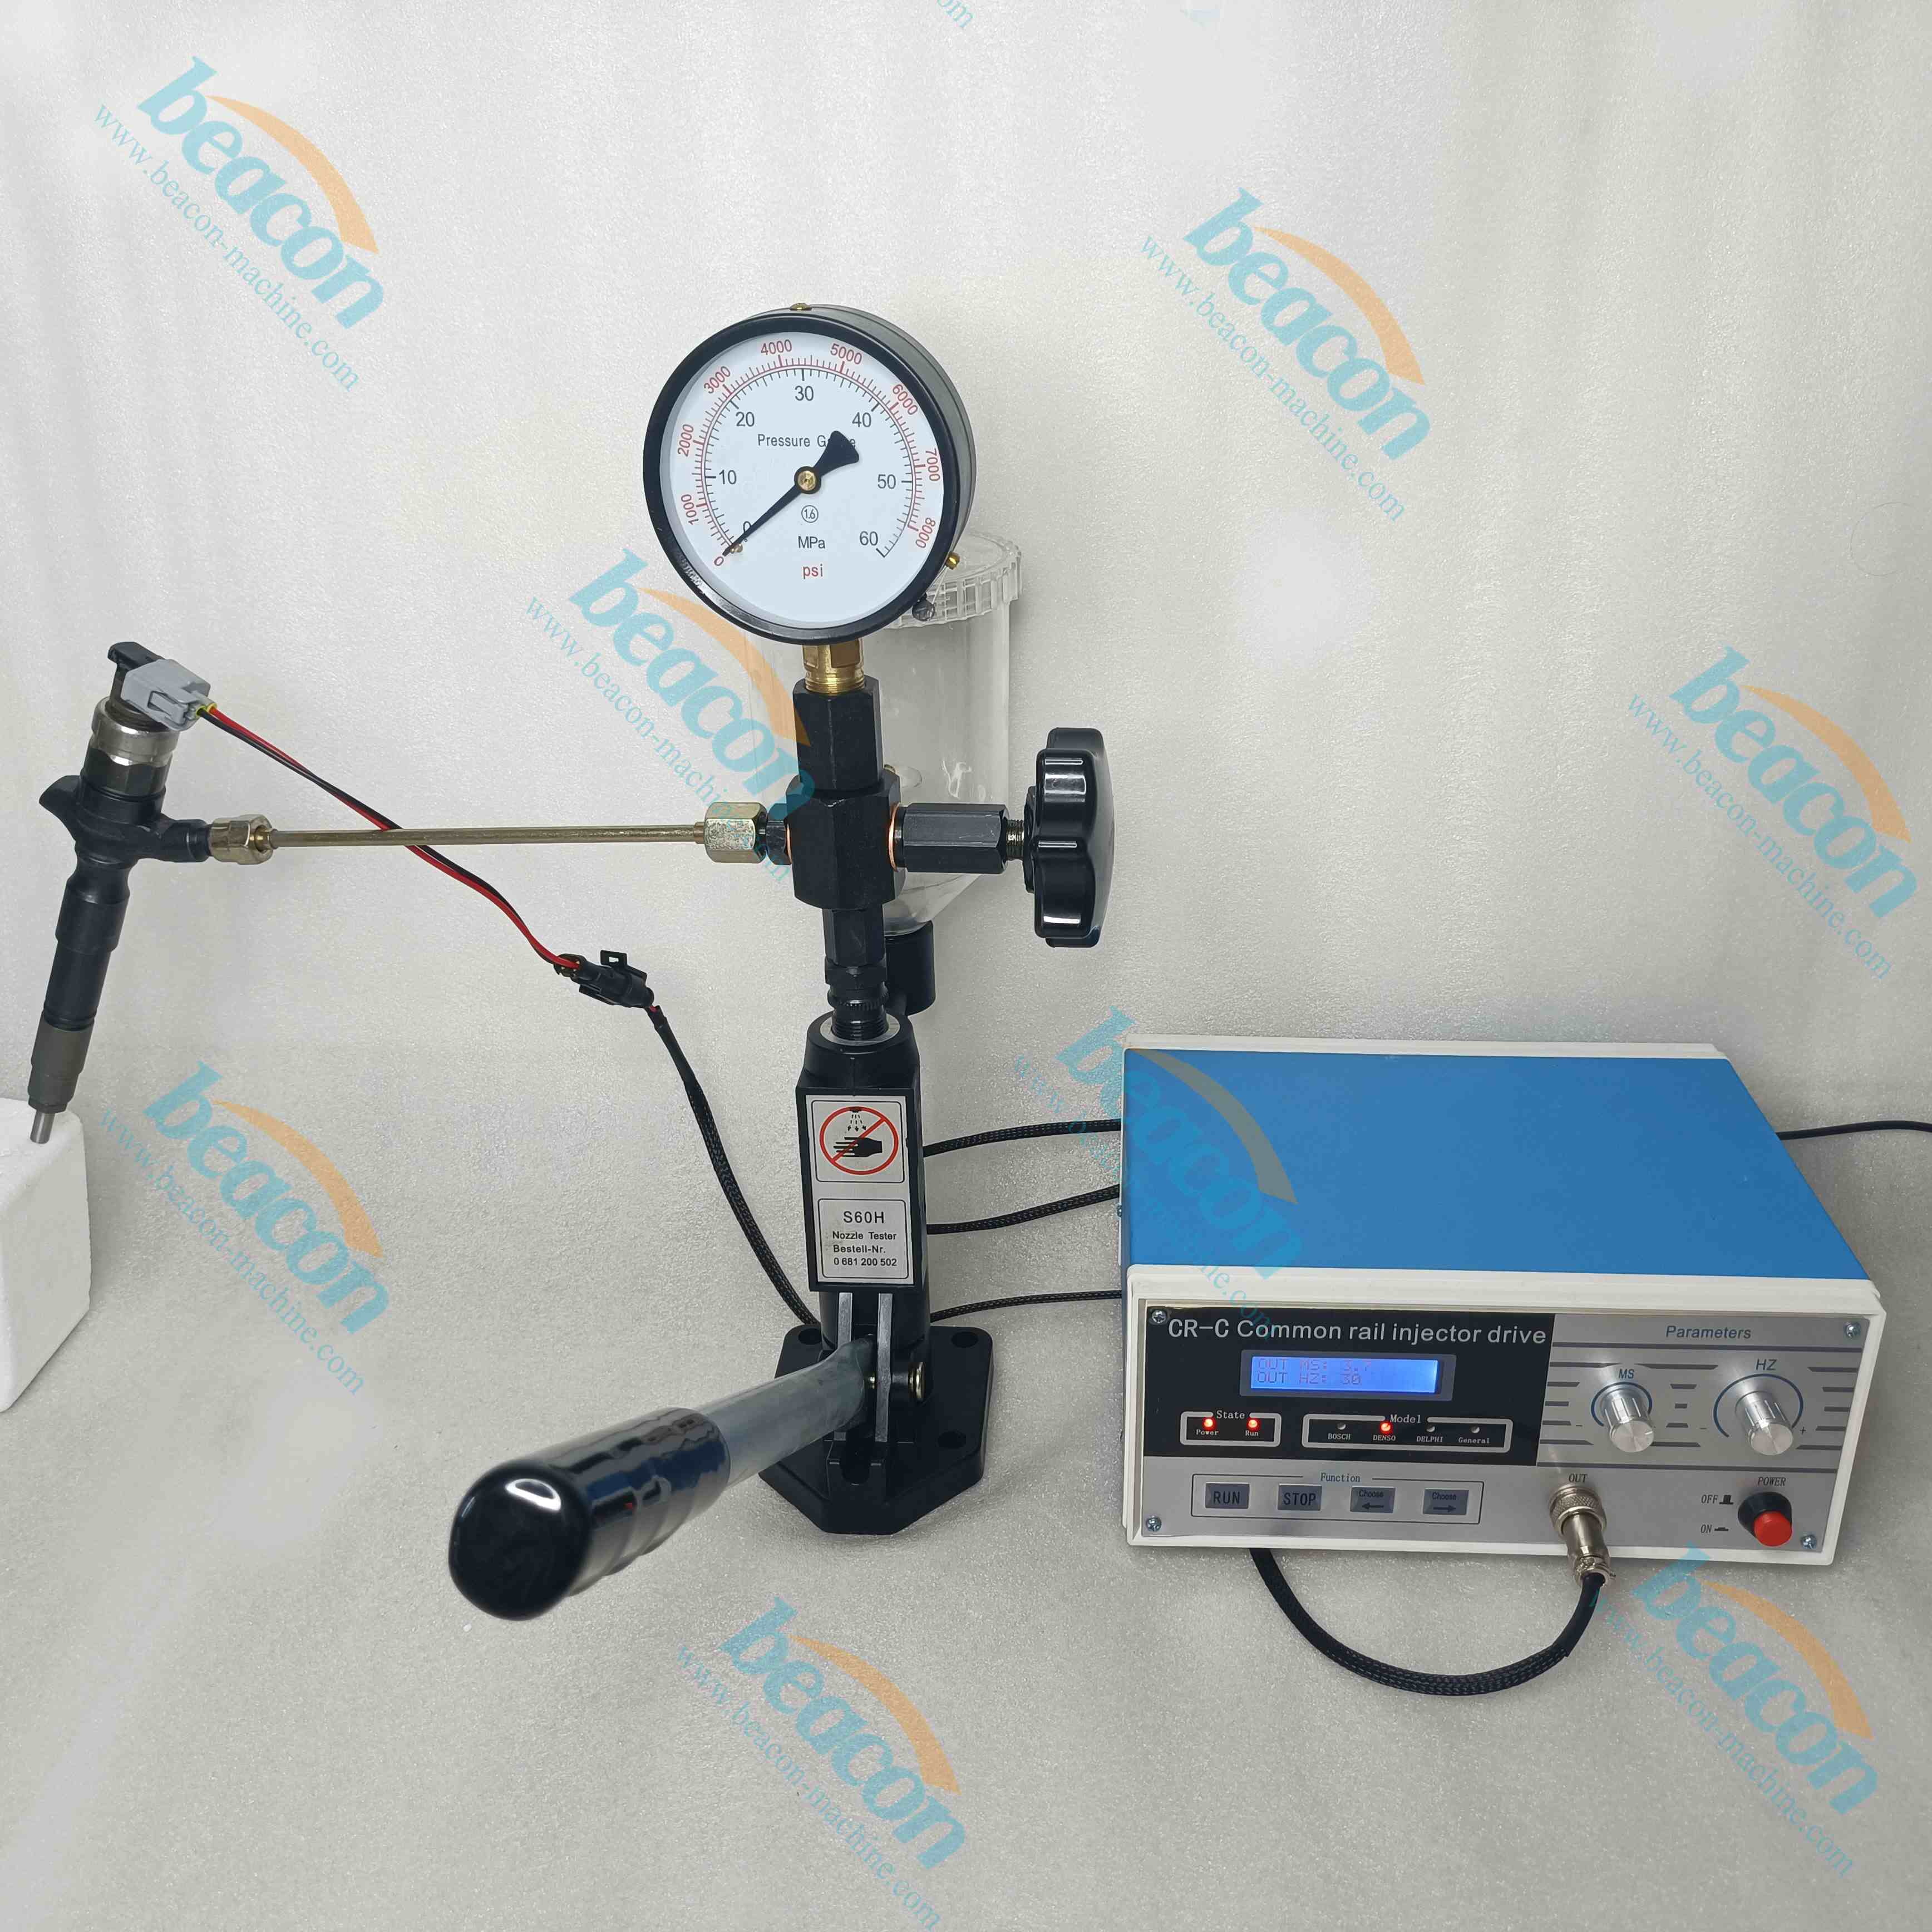 Beacon CR-C +S60H Electronic Equipments Injector Diagnostic Repair Common Rail Injector Nozzle Tester Simulator